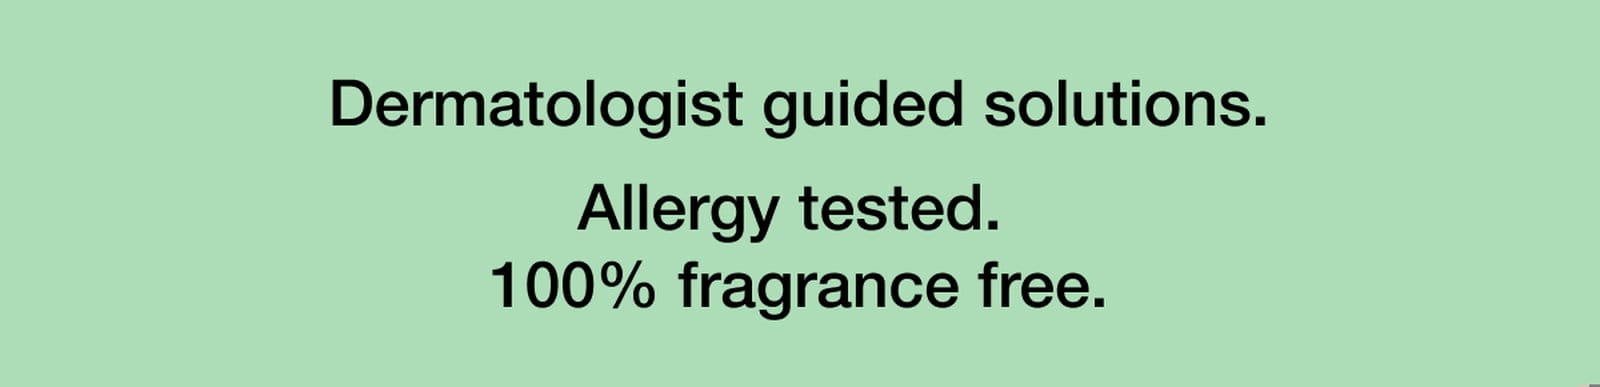 Dermatologist guided solutions. Allergy tested. 100% fragrance free.